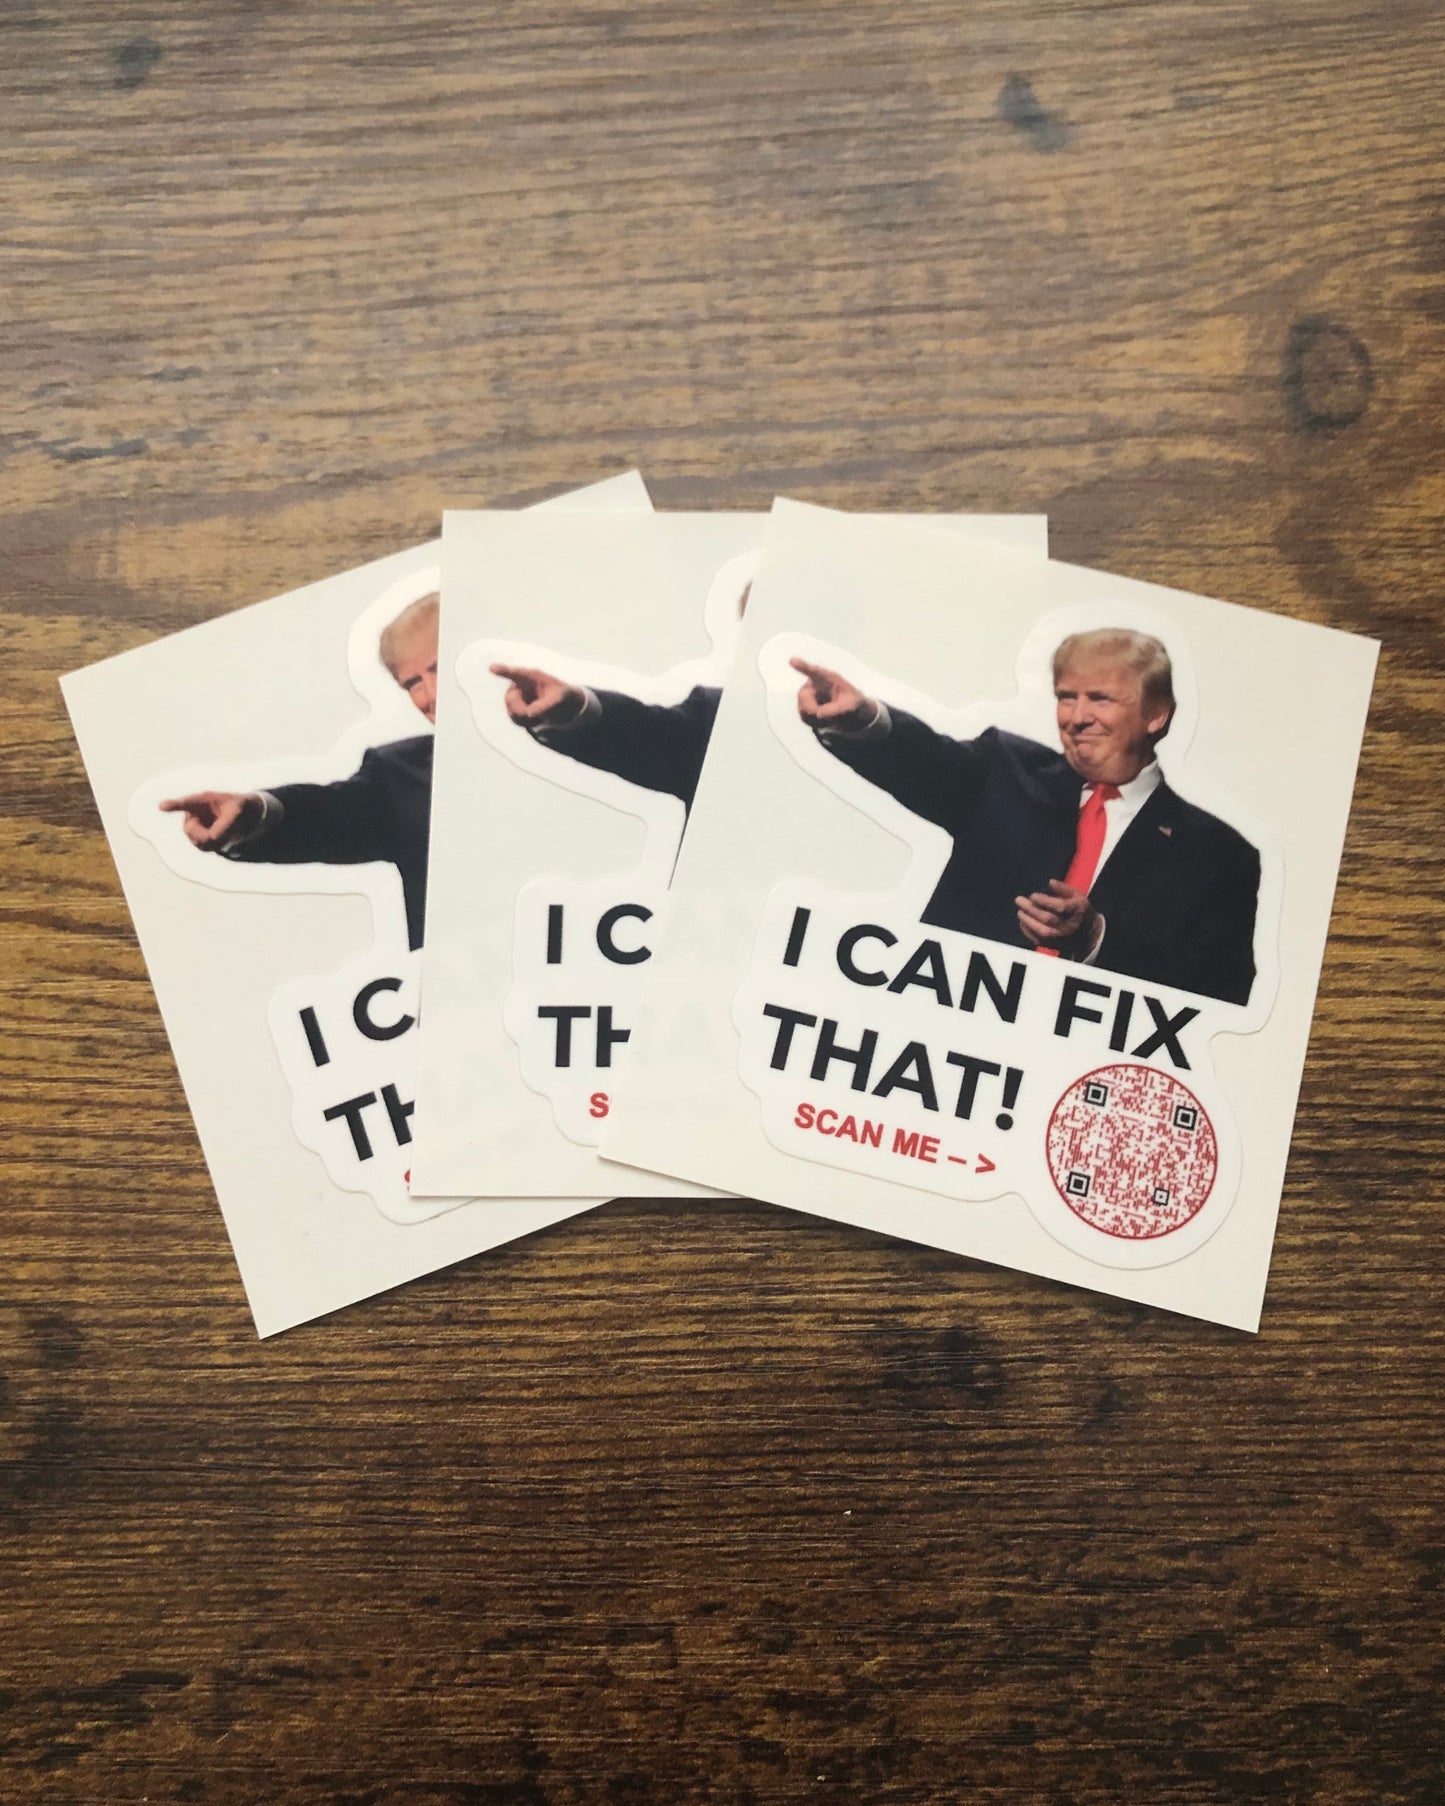 "I Can Fix That!" Scannable Stickers